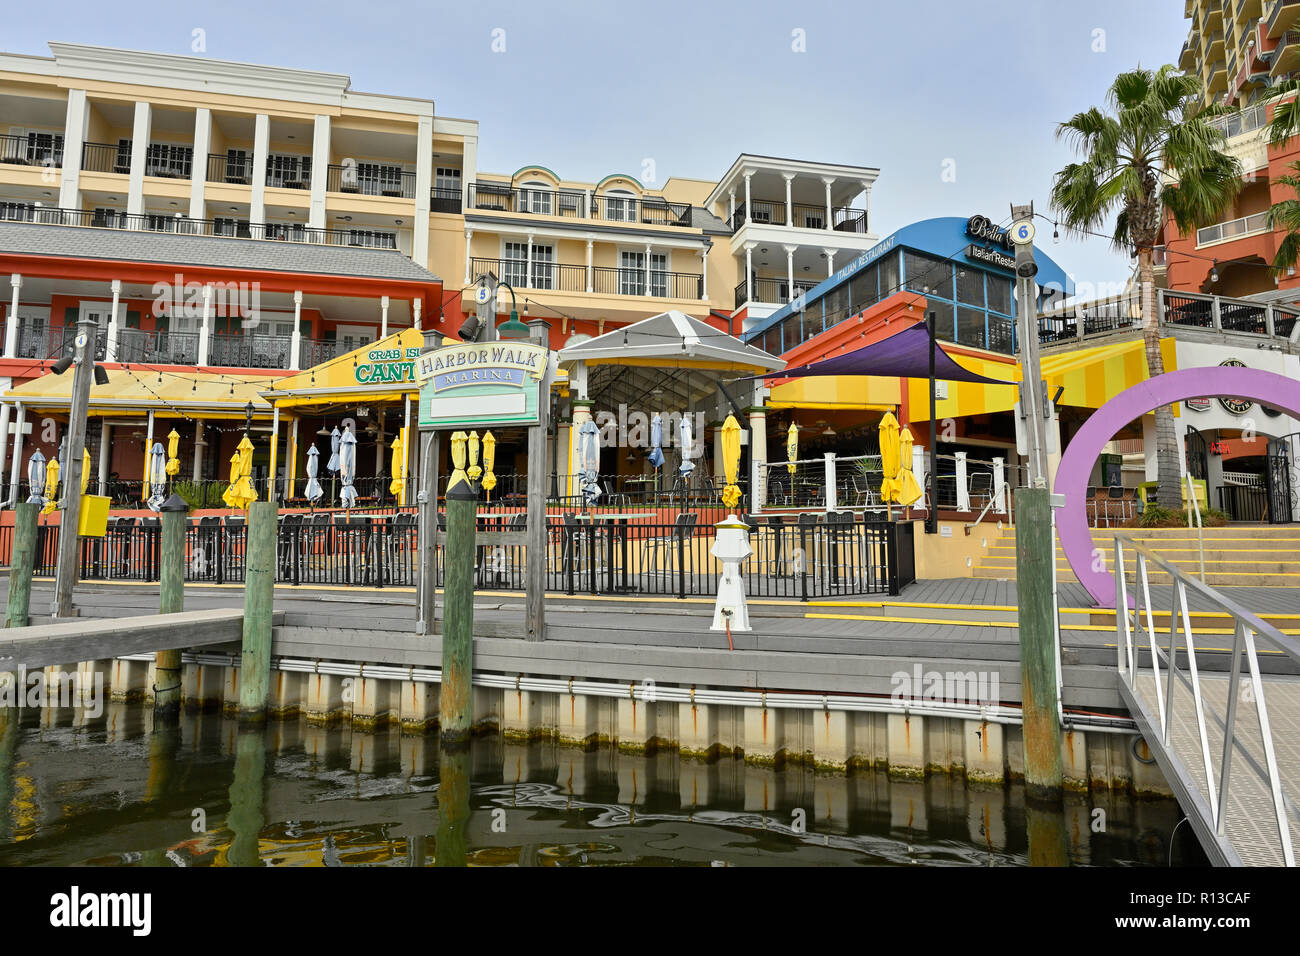 Empty boat slip at the HarborWalk Marina with the stores and shops of Harbor Walk Village in the background, in Destin Florida, USA. Stock Photo